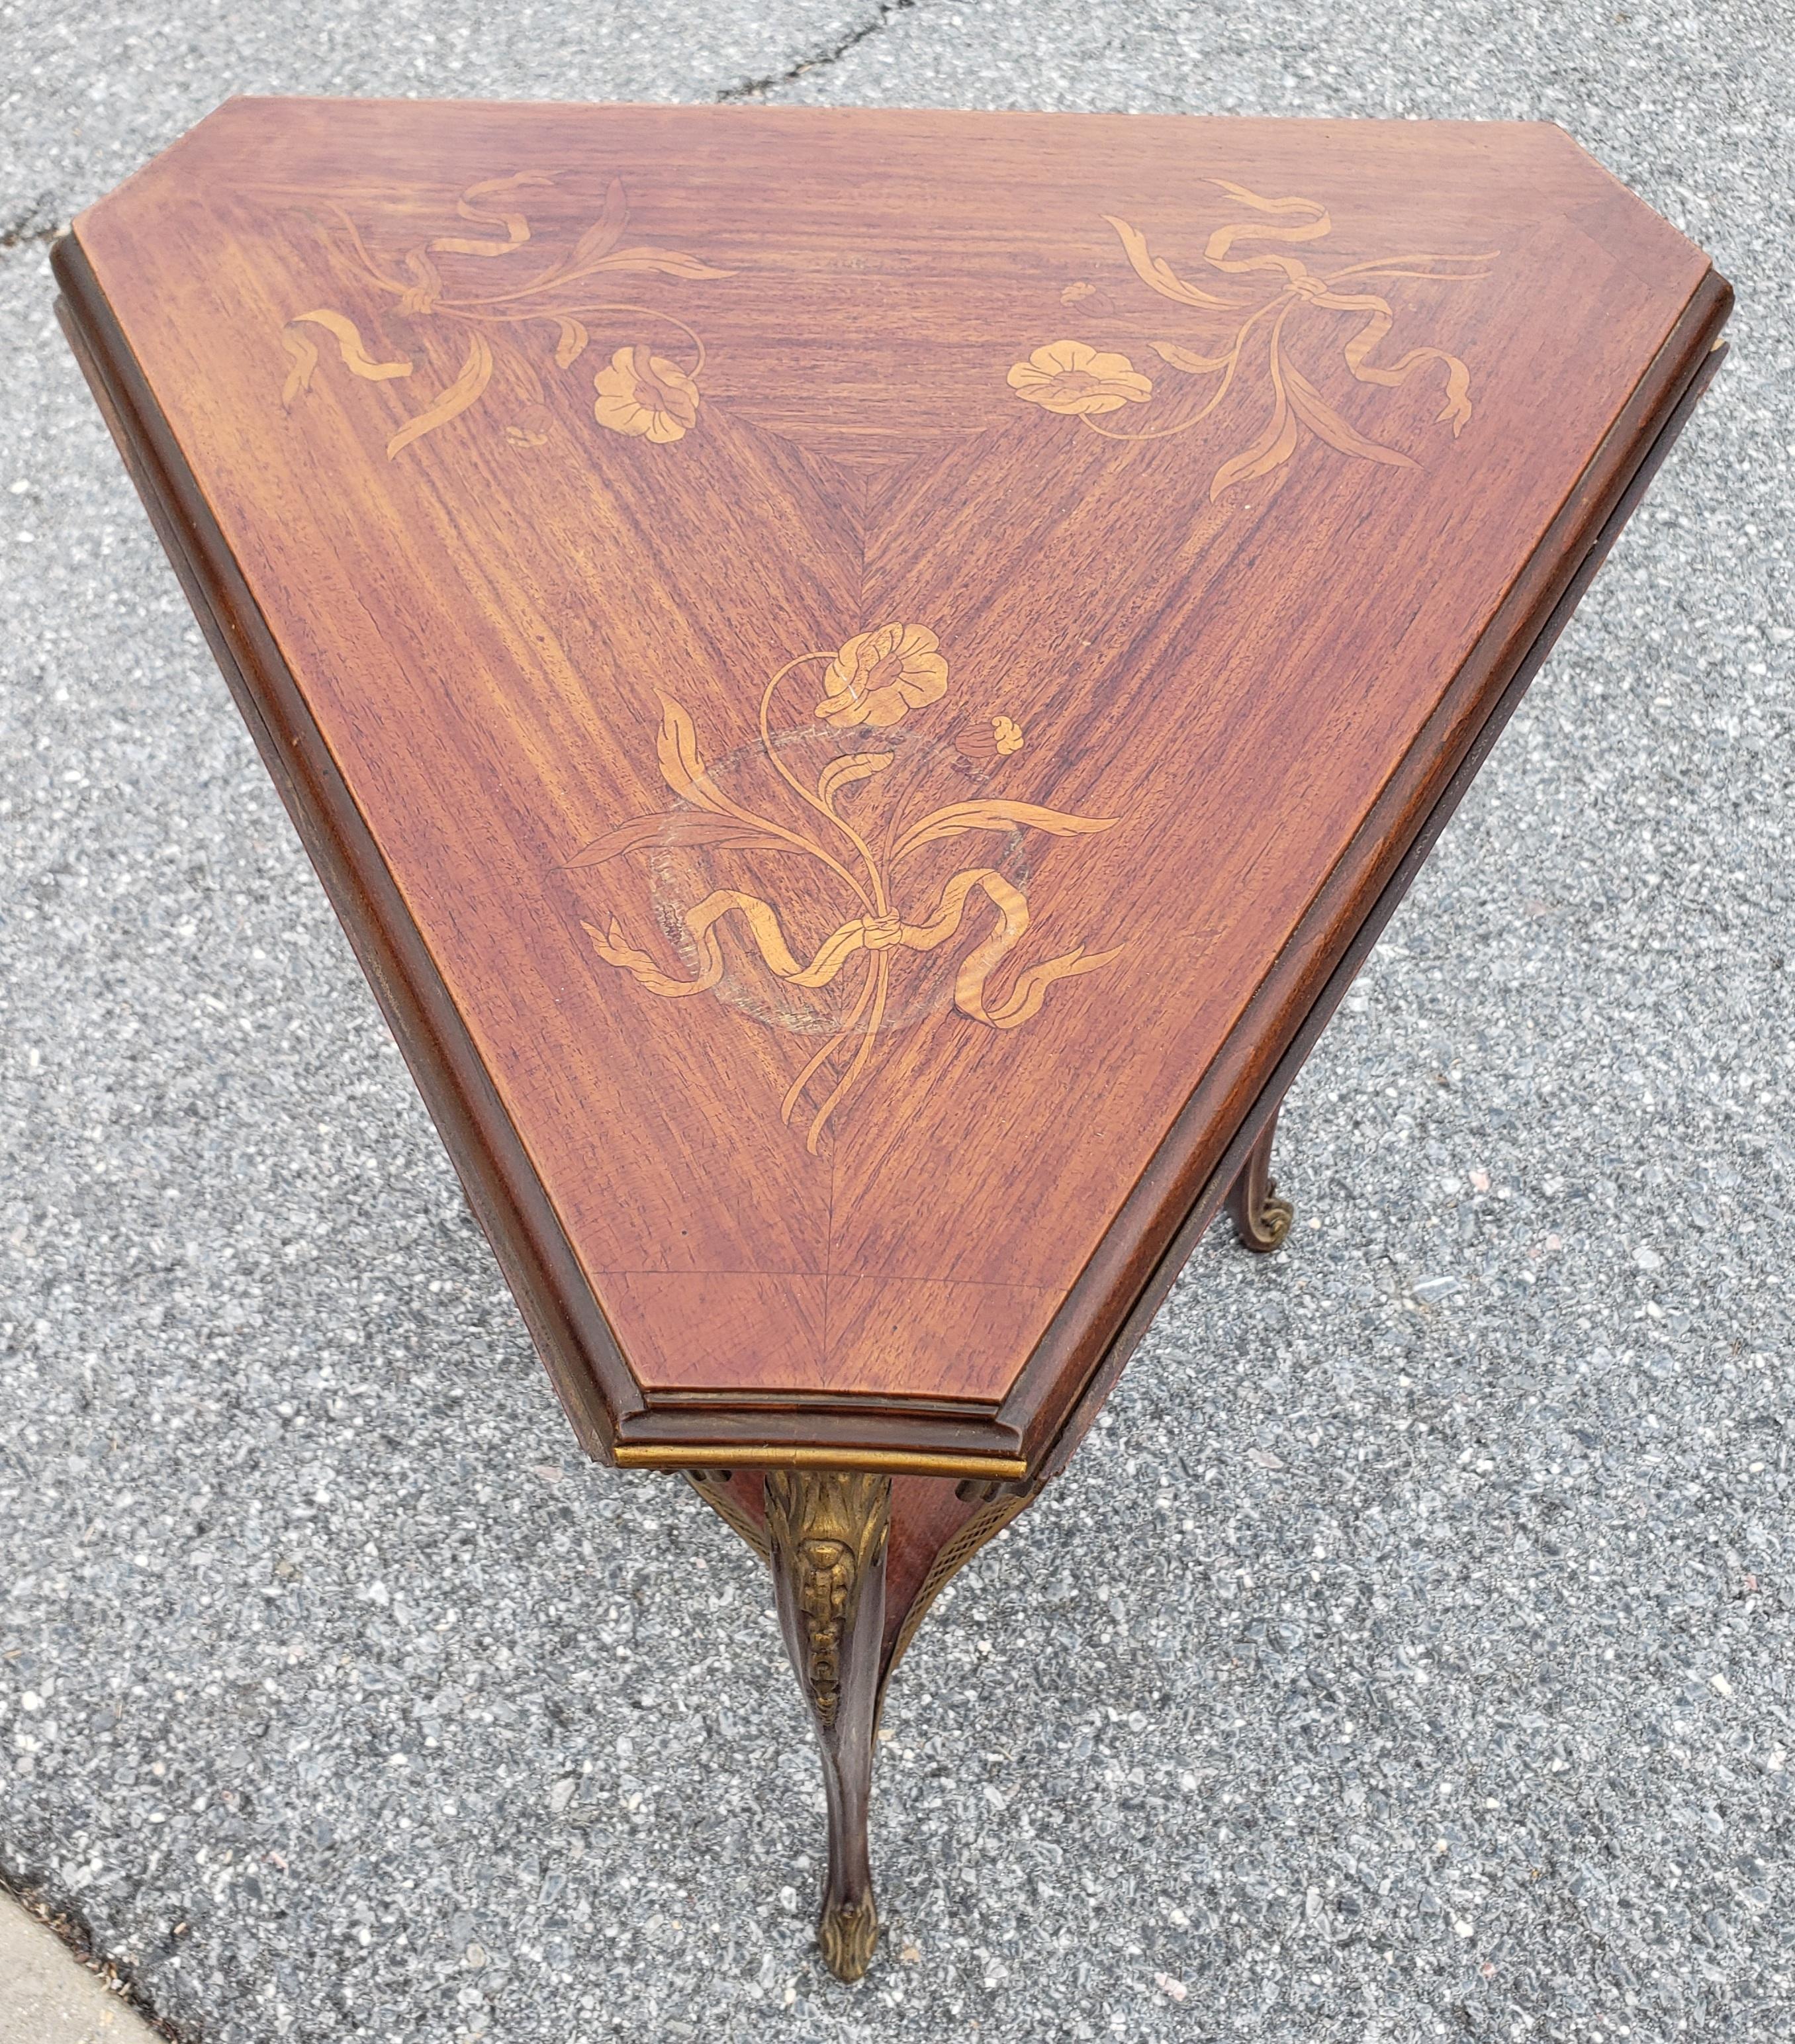 Rococo Revival Rococo Style Marquetry Fruitwood & Gilt Metal Mounted Triangular Drop Leaf Table For Sale